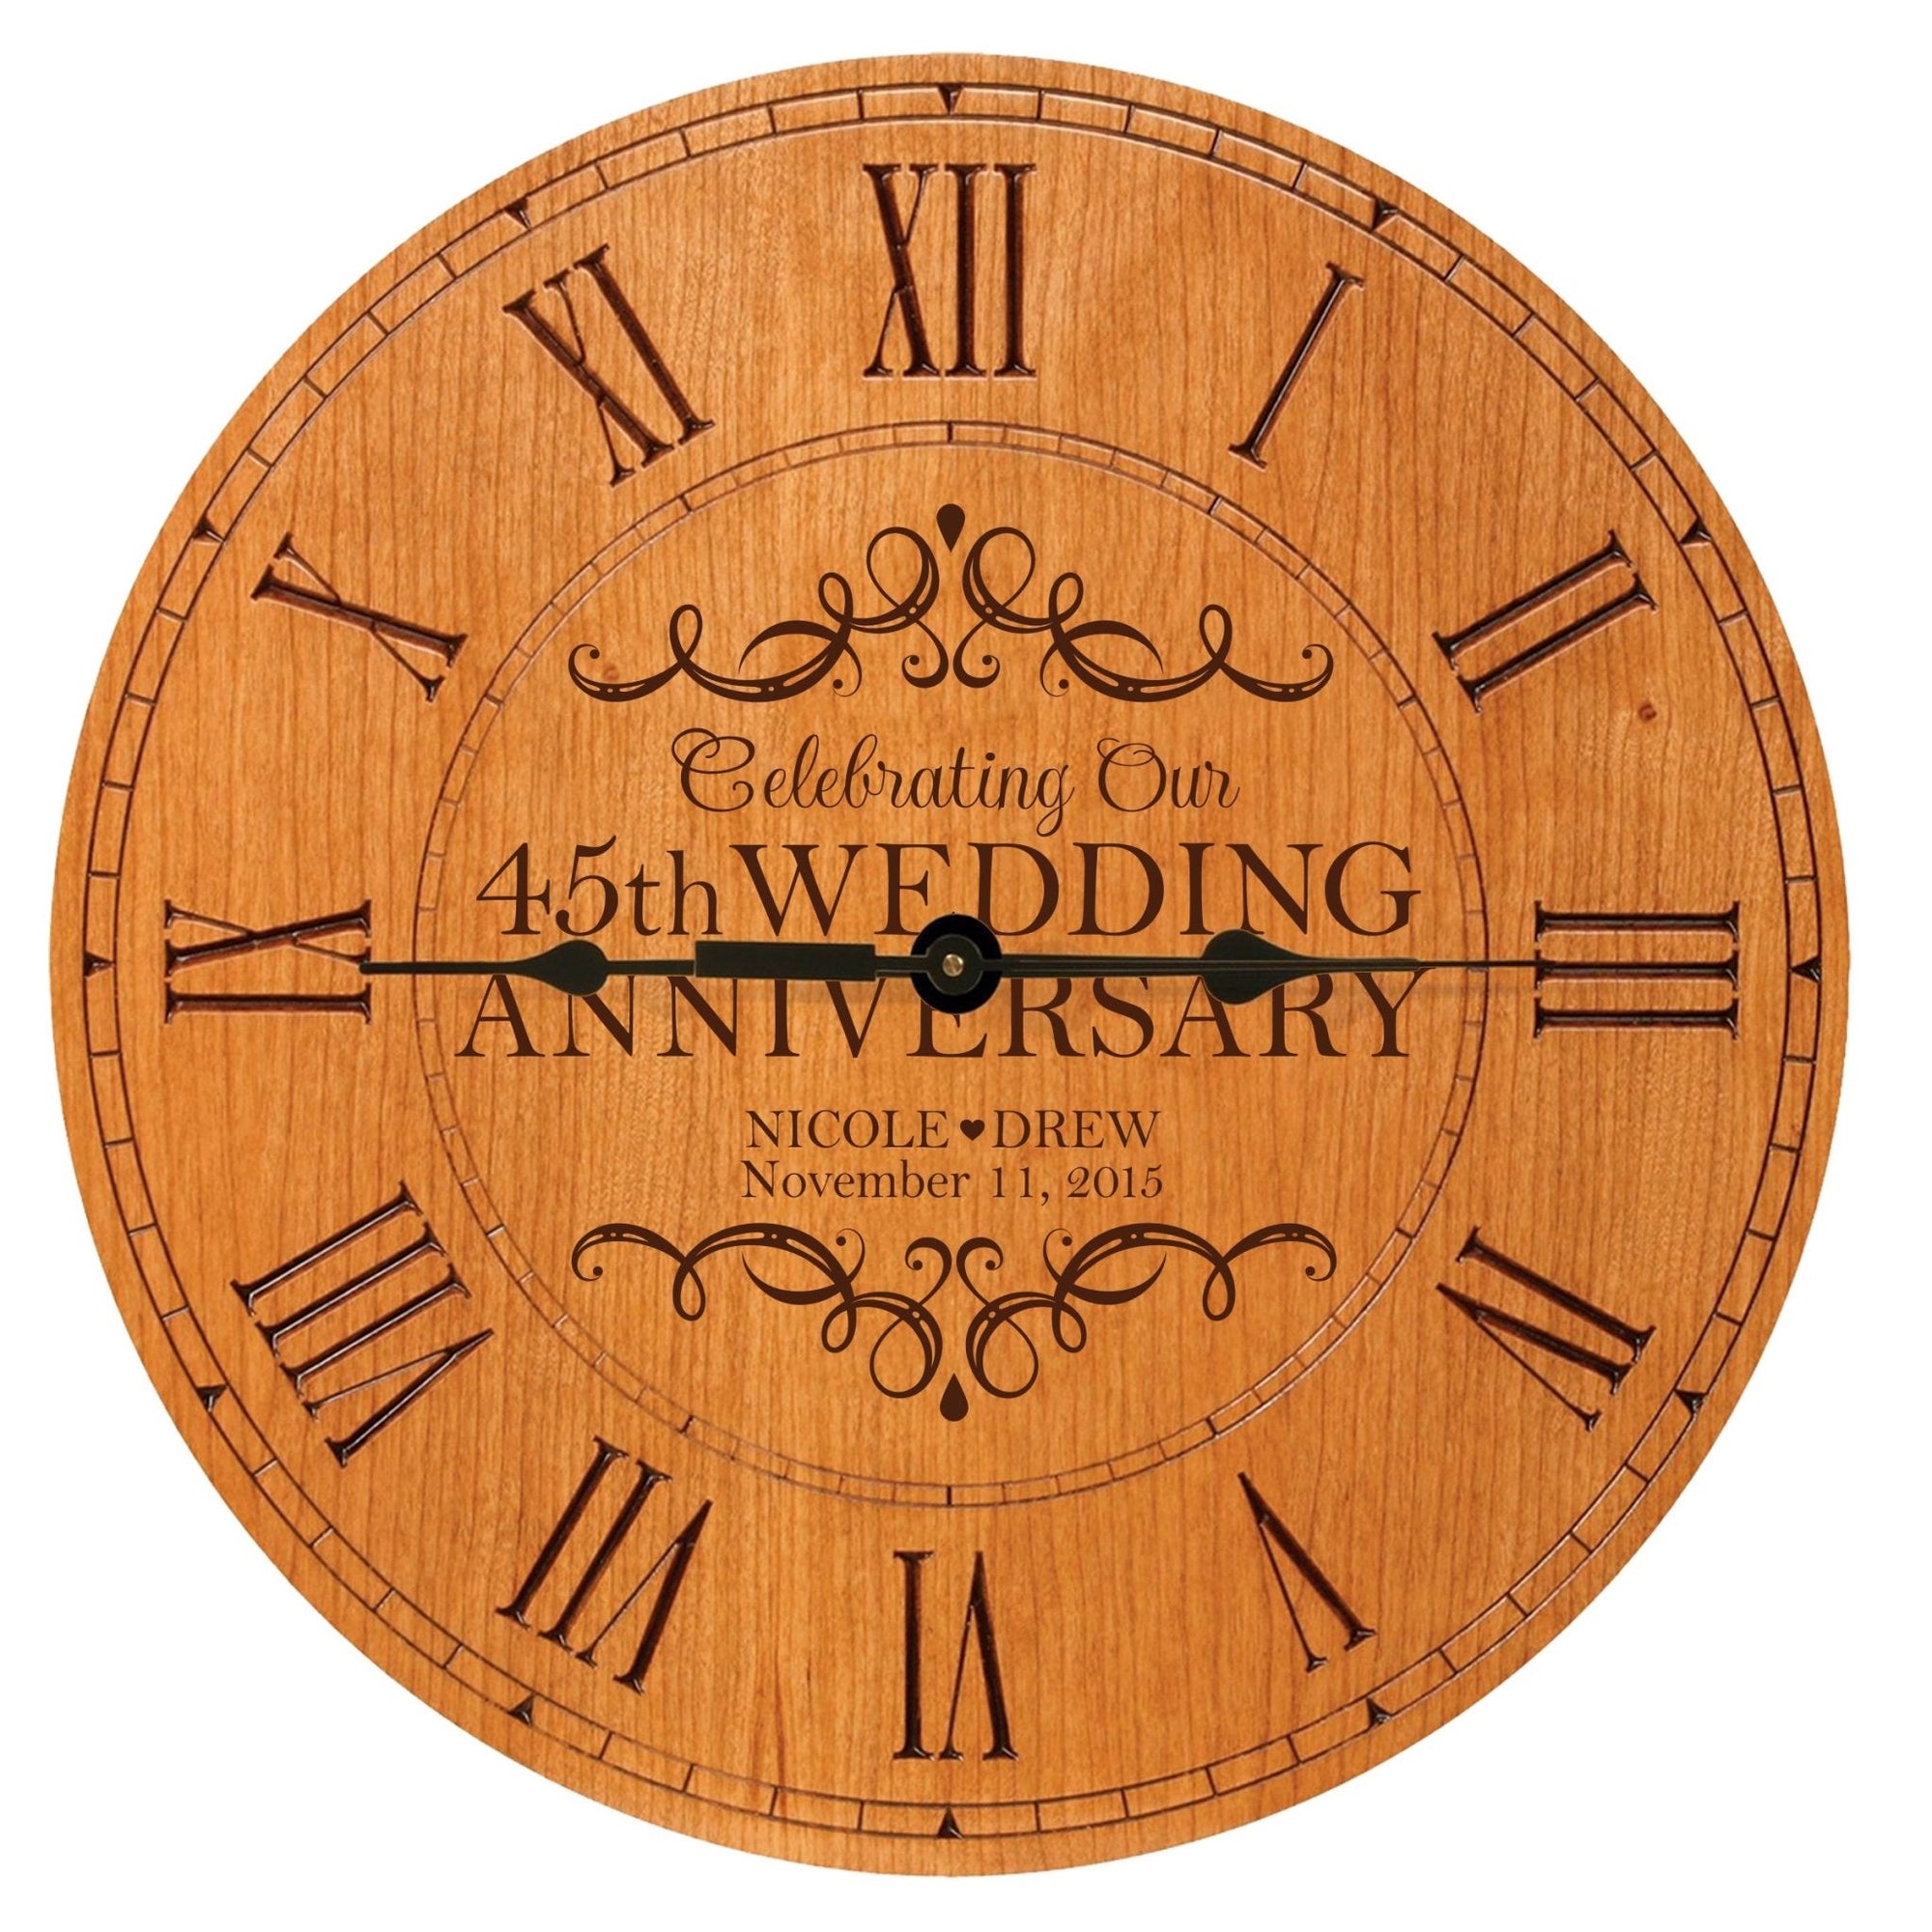 Lifesong Milestones Personalized Engraved Wooden Wall Clock for 45th Wedding Anniversary Gift Ideas